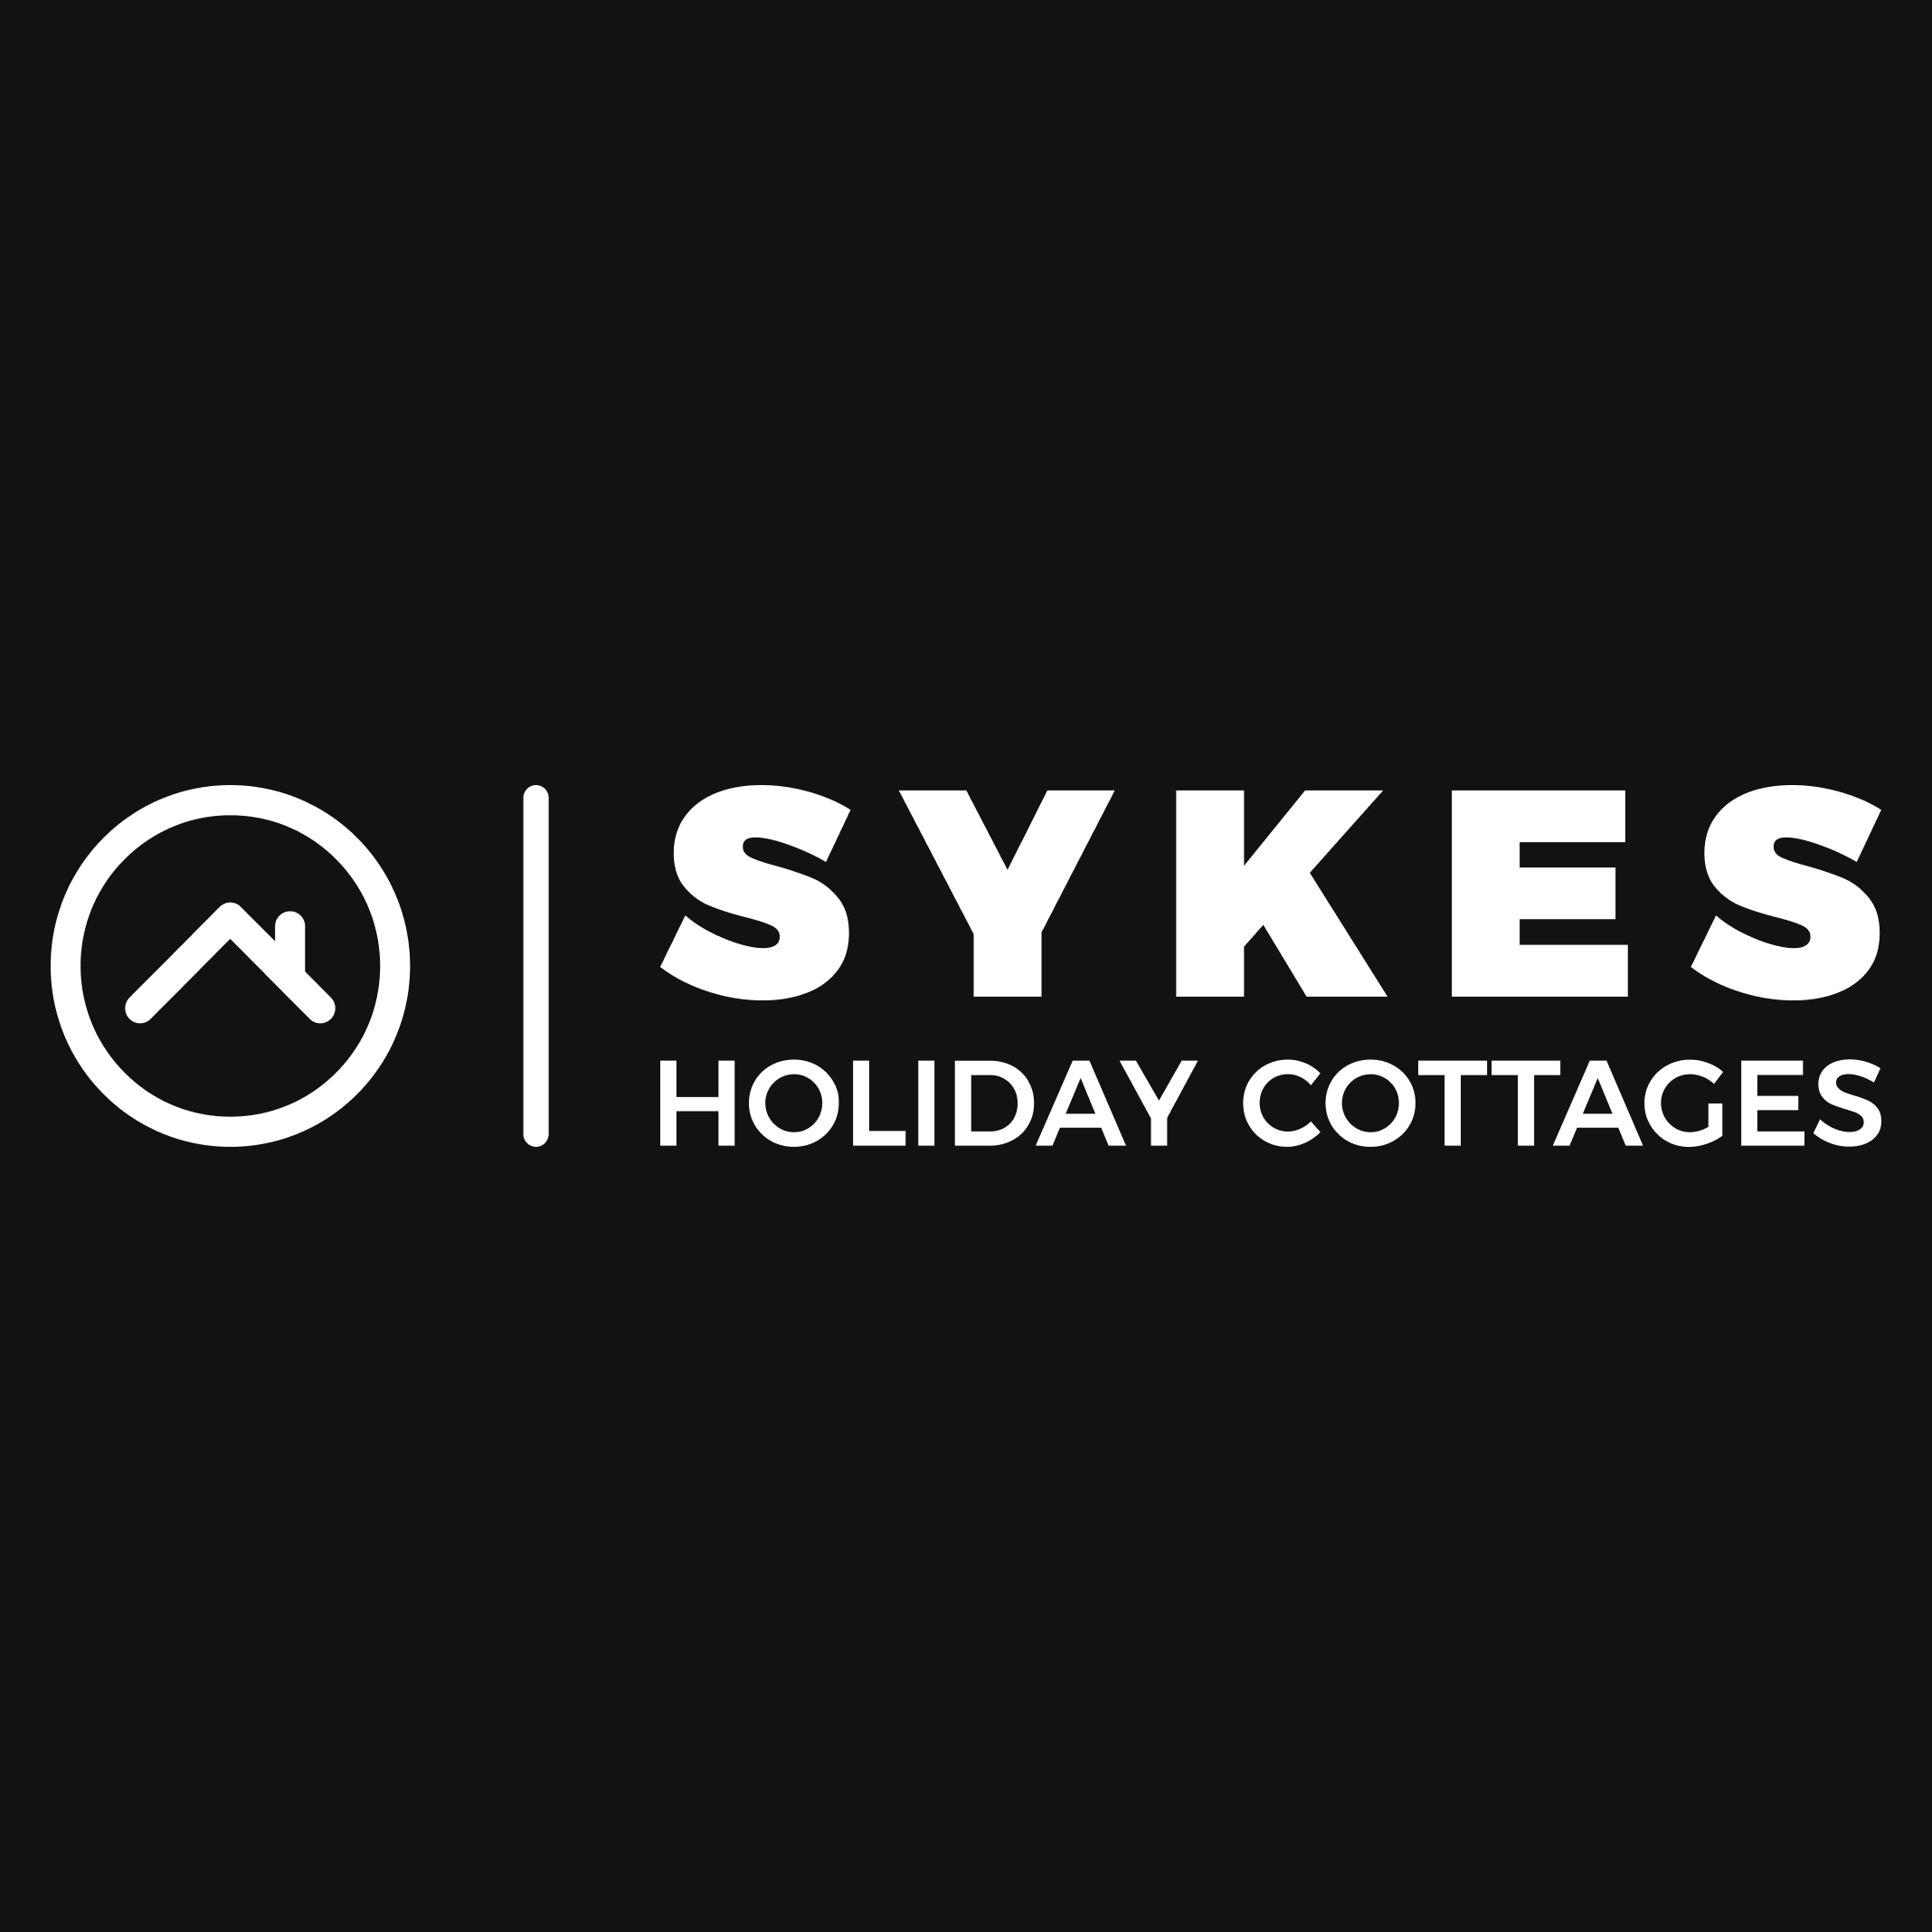 Sykes Cottages | Black and White logo